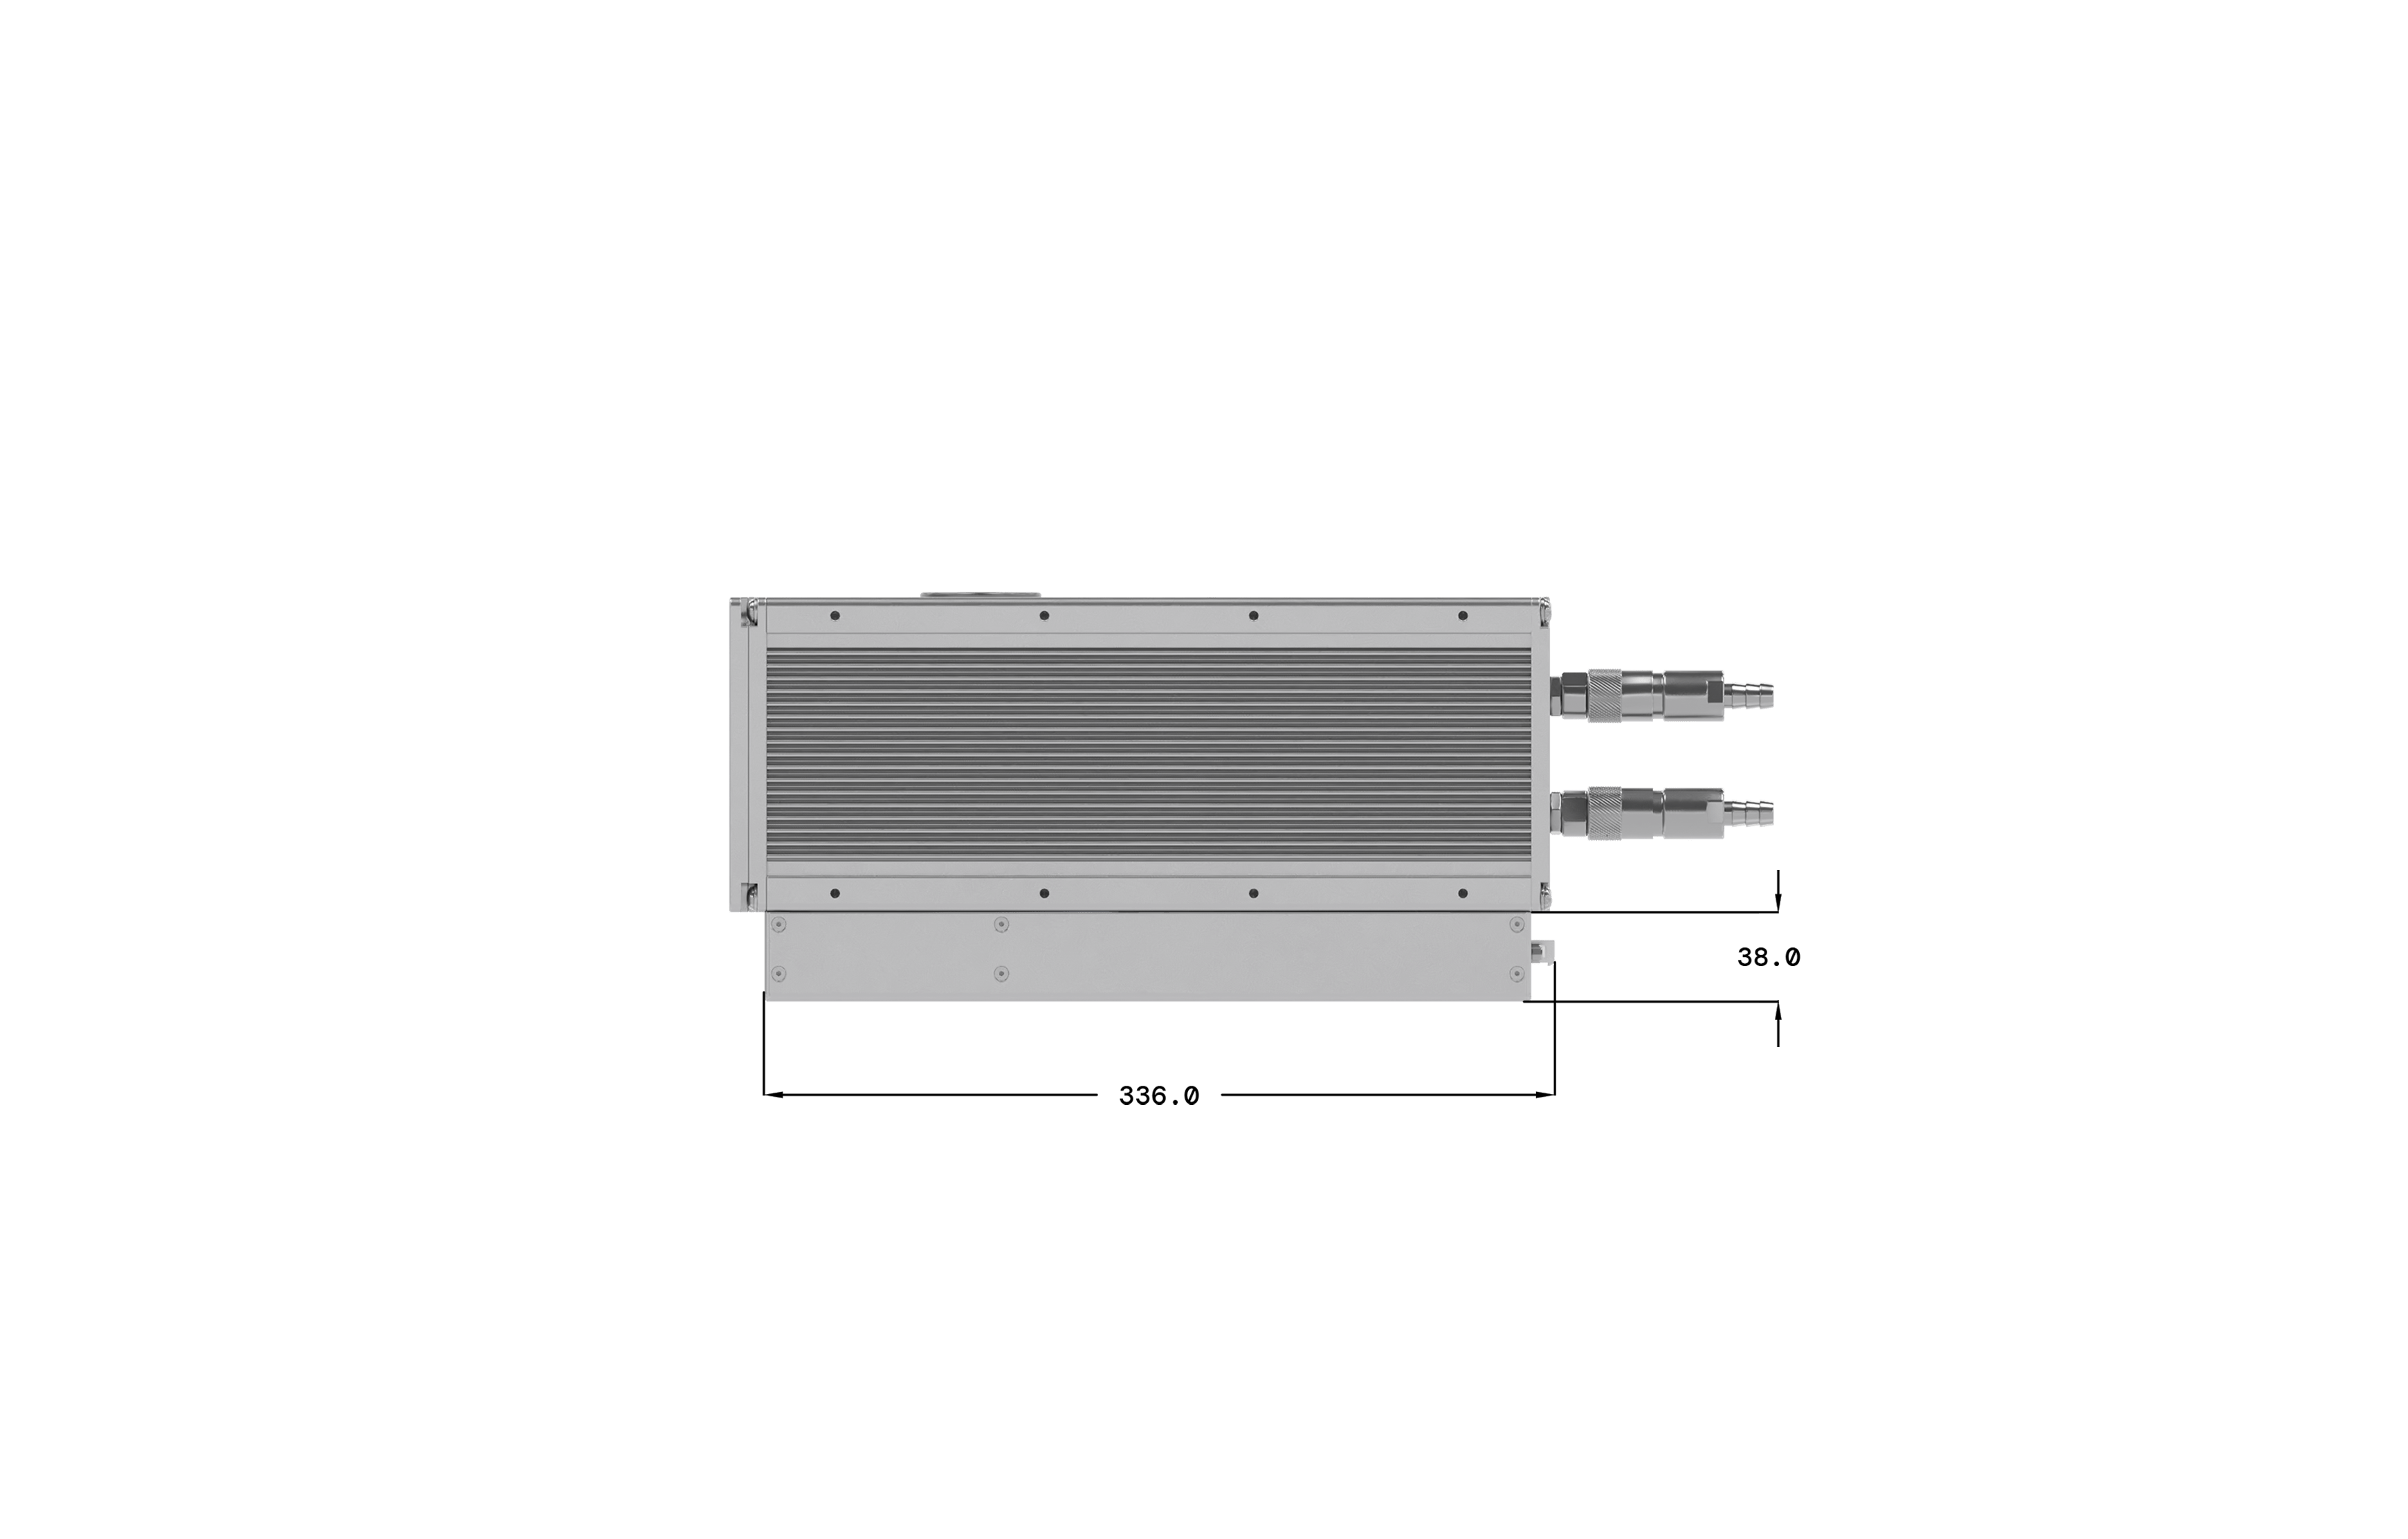 integrated x-ray source dimensions